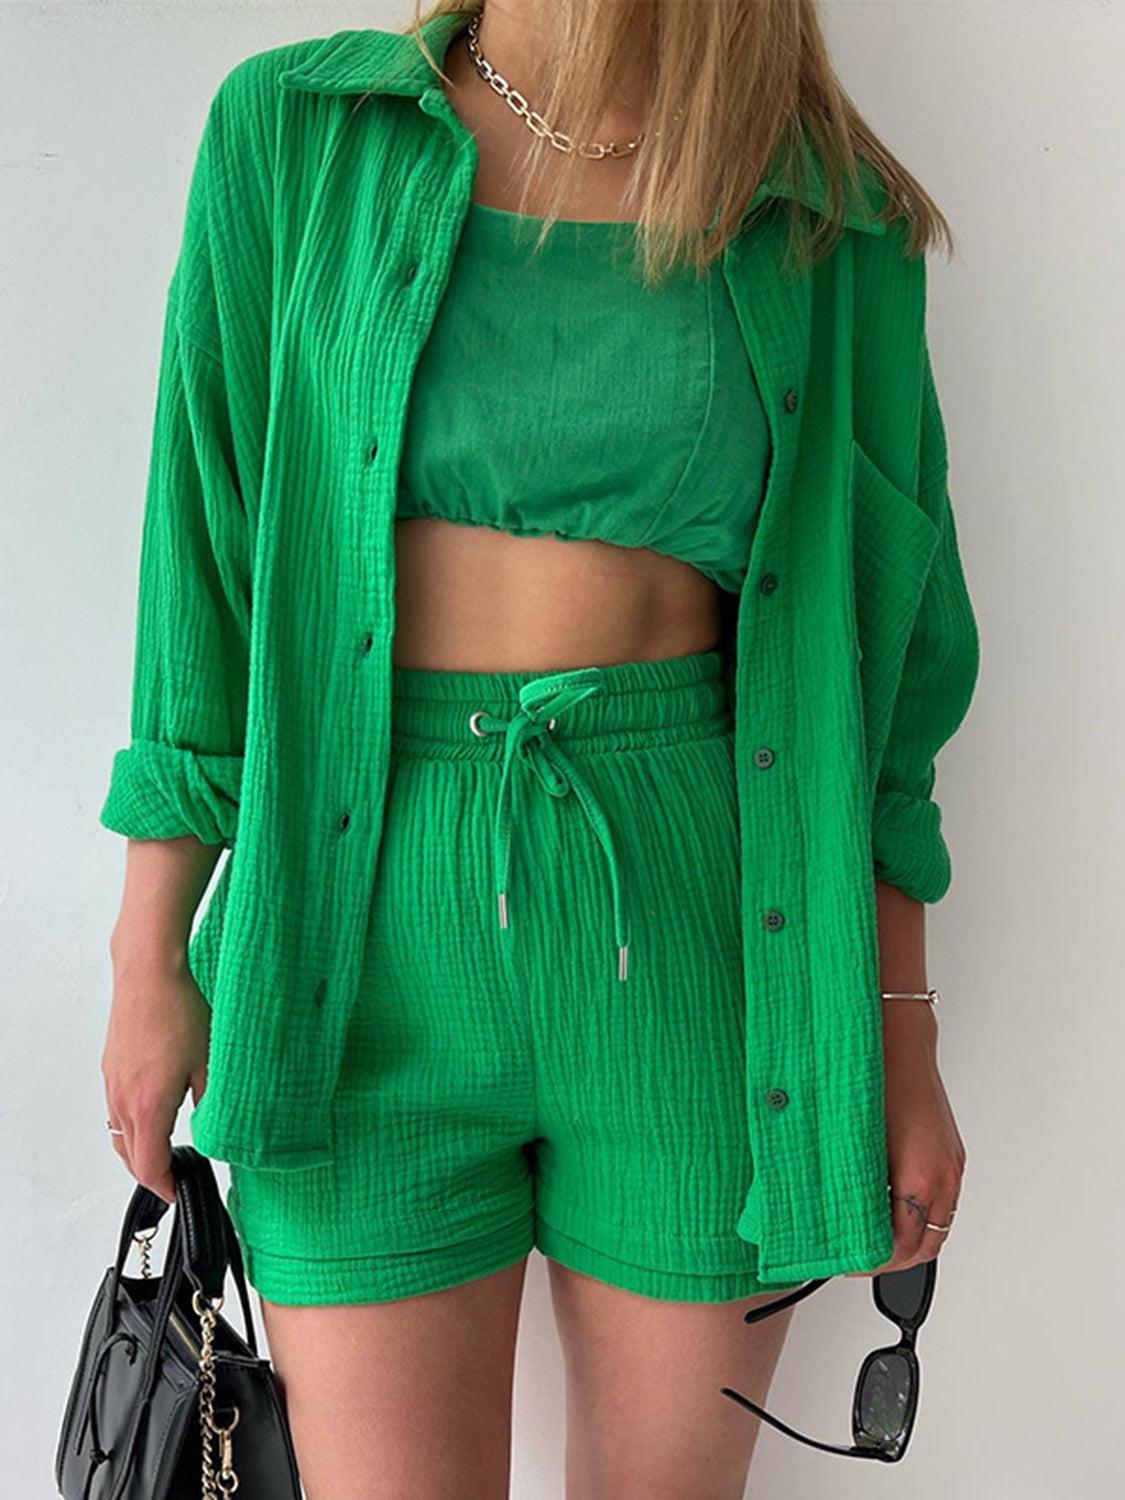 a woman in a green shirt and shorts